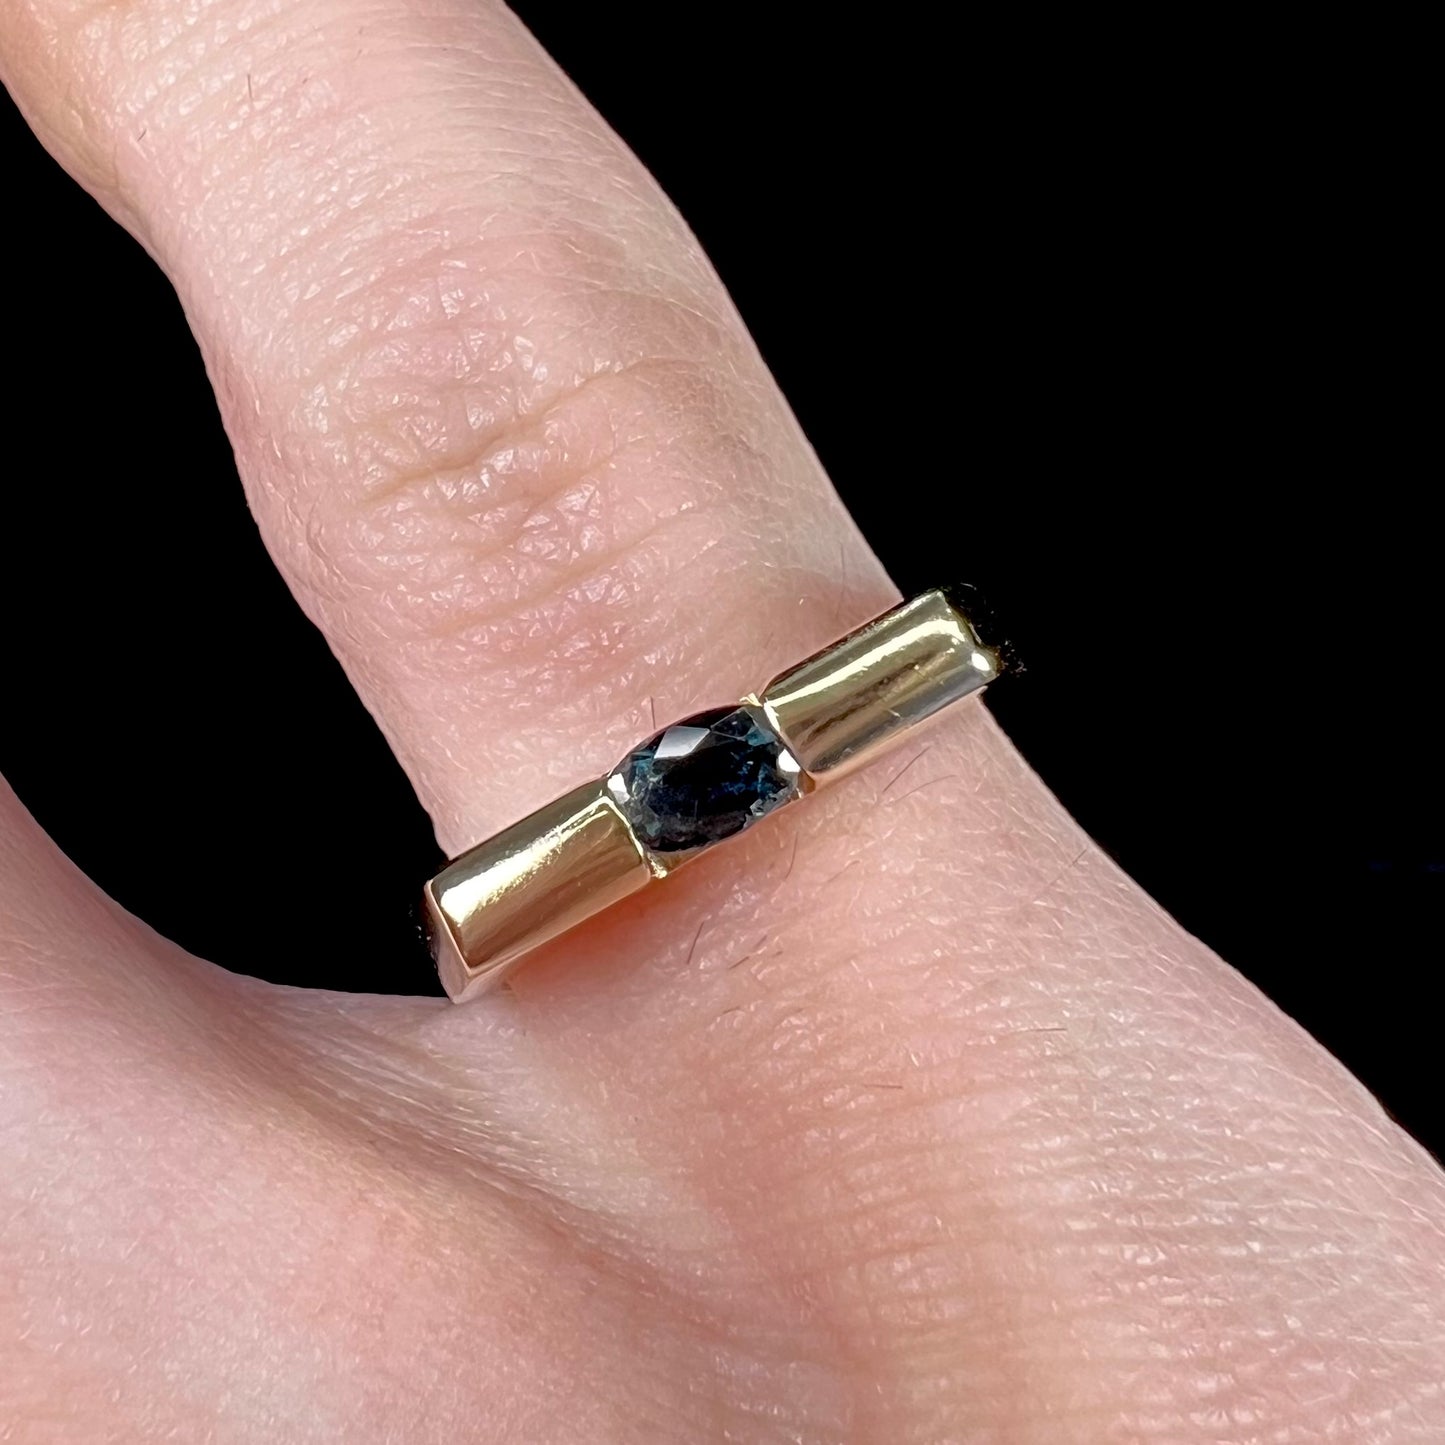 A ladies' yellow gold solitire ring horizontally set with an oval cut dark teal blue sapphire stone.